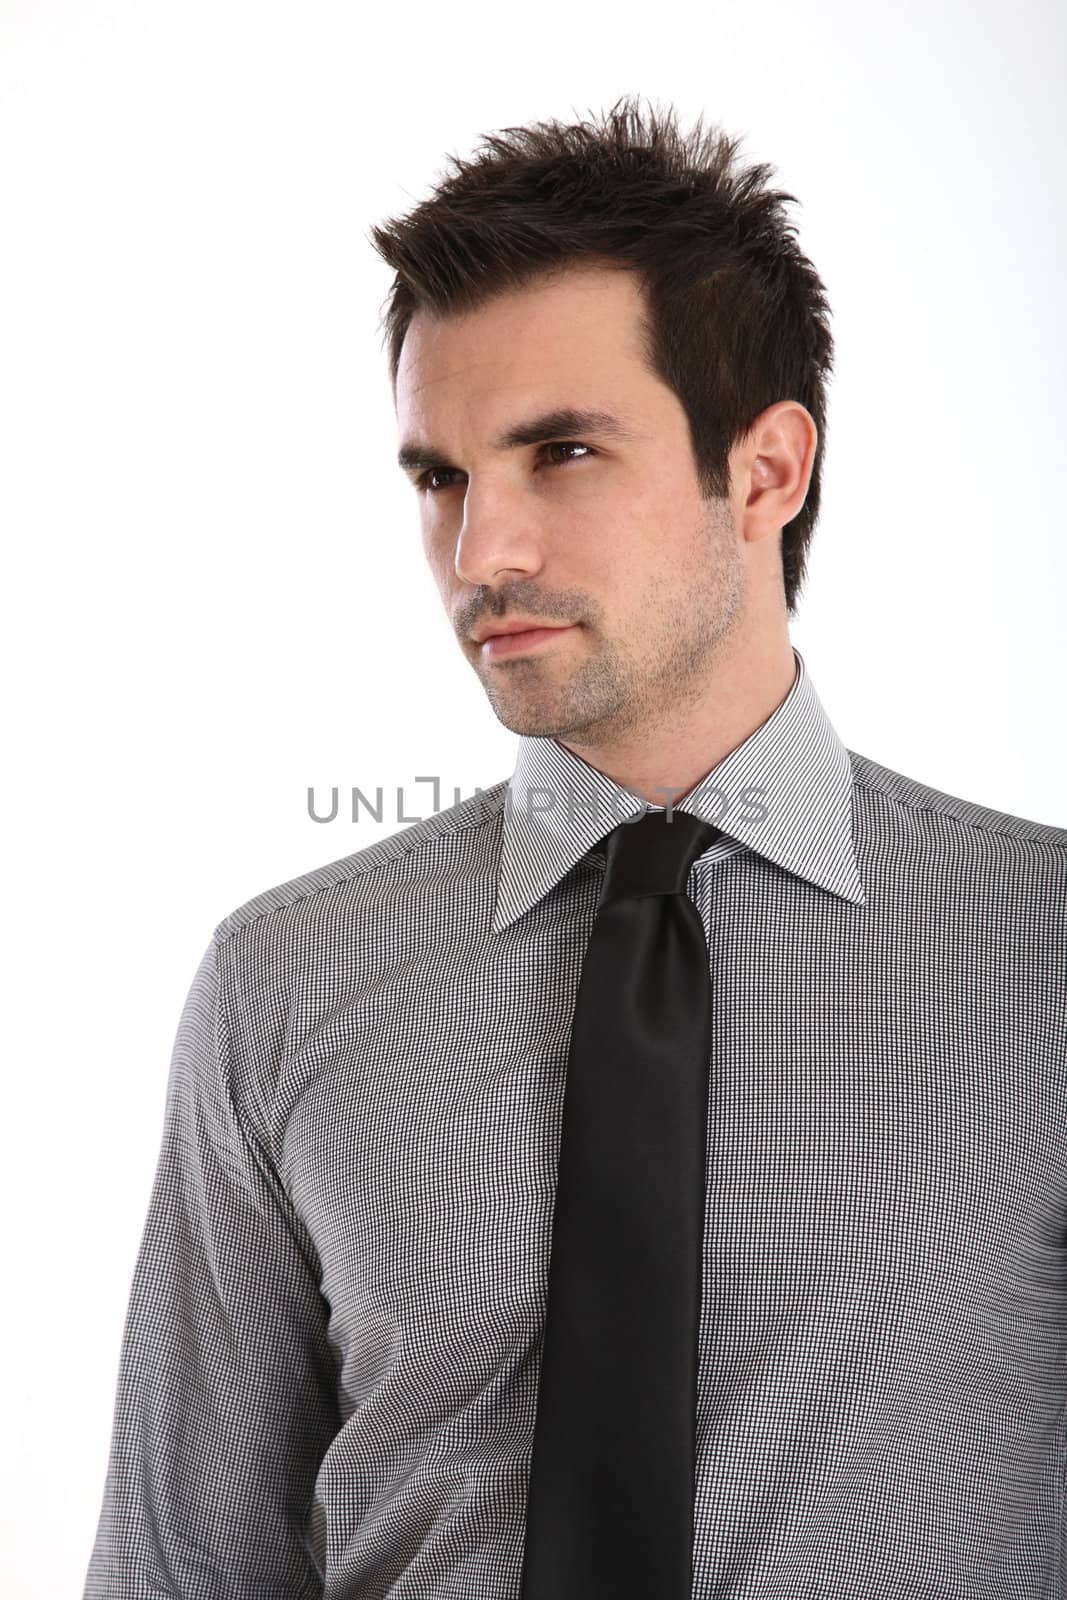 Portrait of an Handsome man in shirt and tie